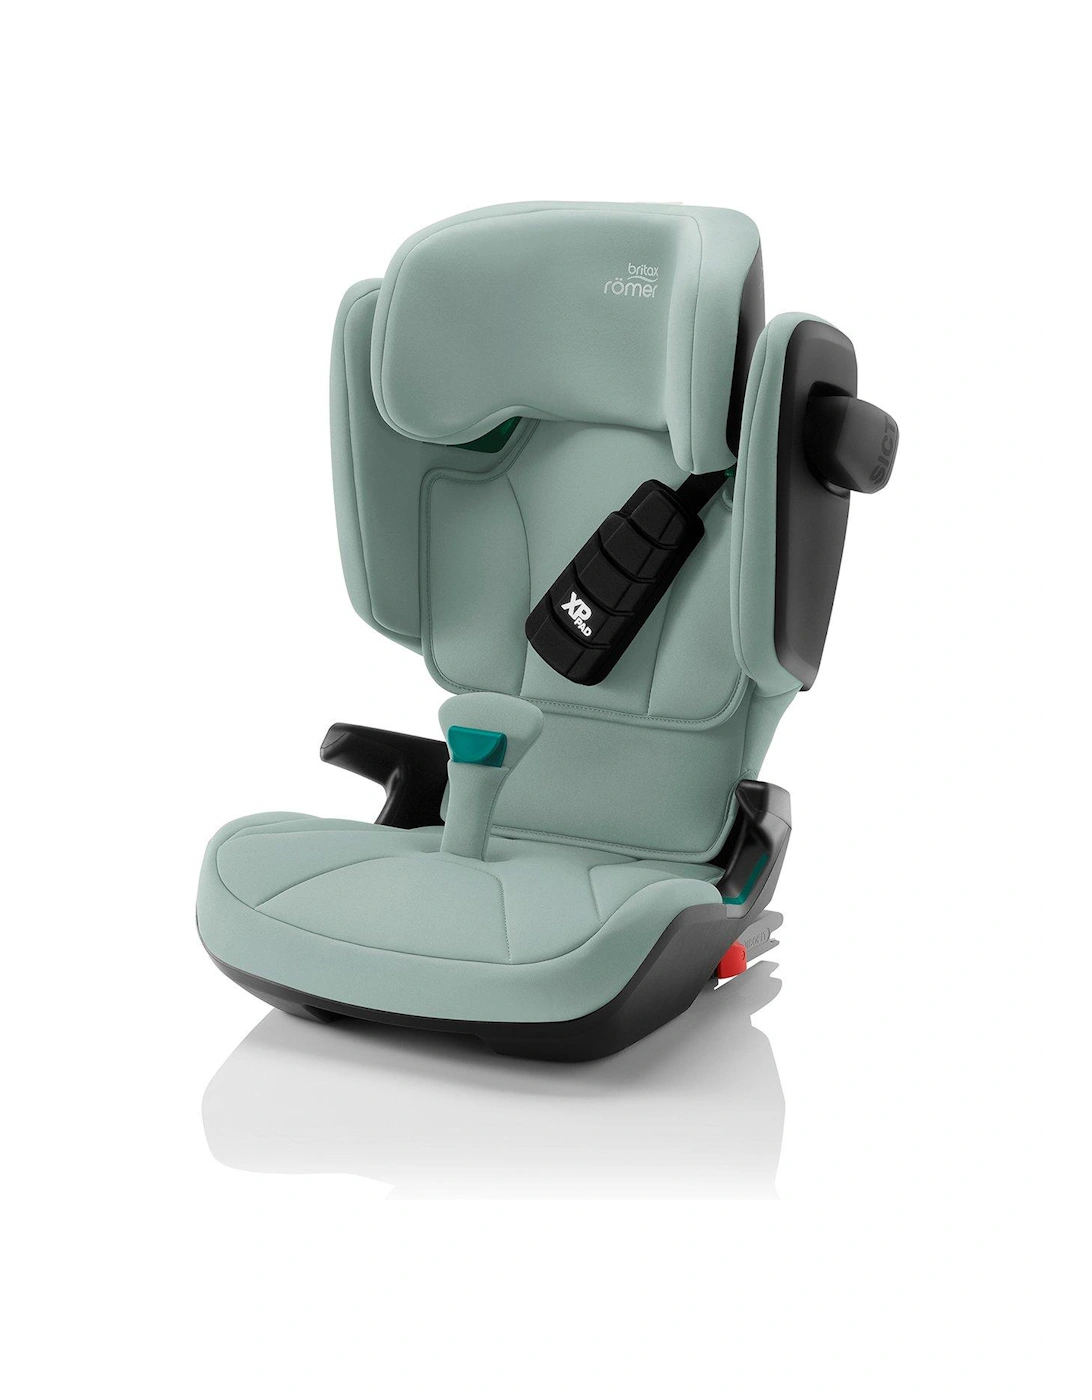 Romer KIDFIX i-SIZE Car Seat 3.5 to 12 years approx - Child (Group 2-3)- Jade Green, 2 of 1